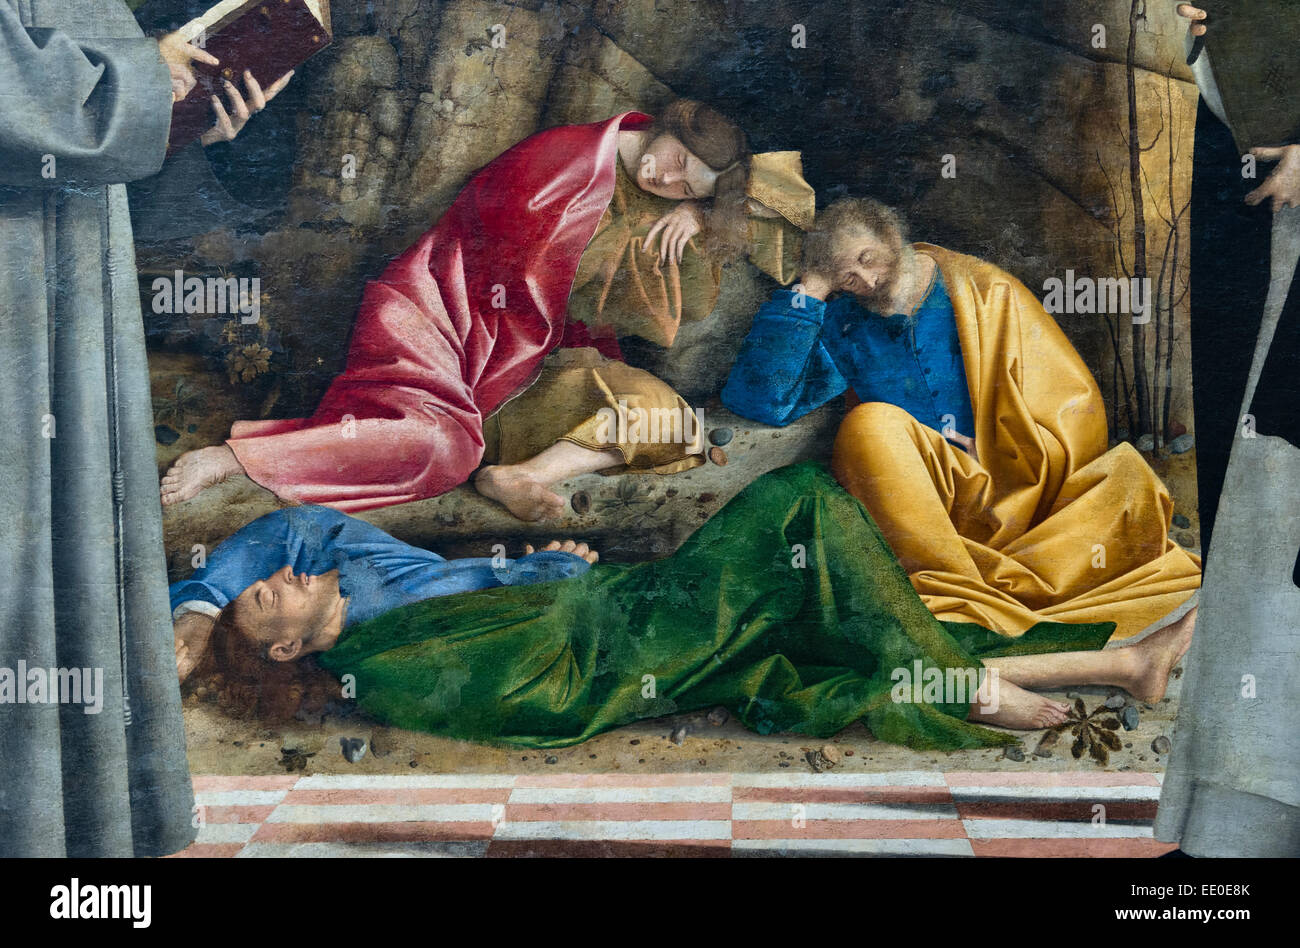 Gallerie dell'Accademia Venice. Christ Praying in the Garden (Orazione nell'orto) by Marco Basaiti - detail showing the sleeping disciples Stock Photo